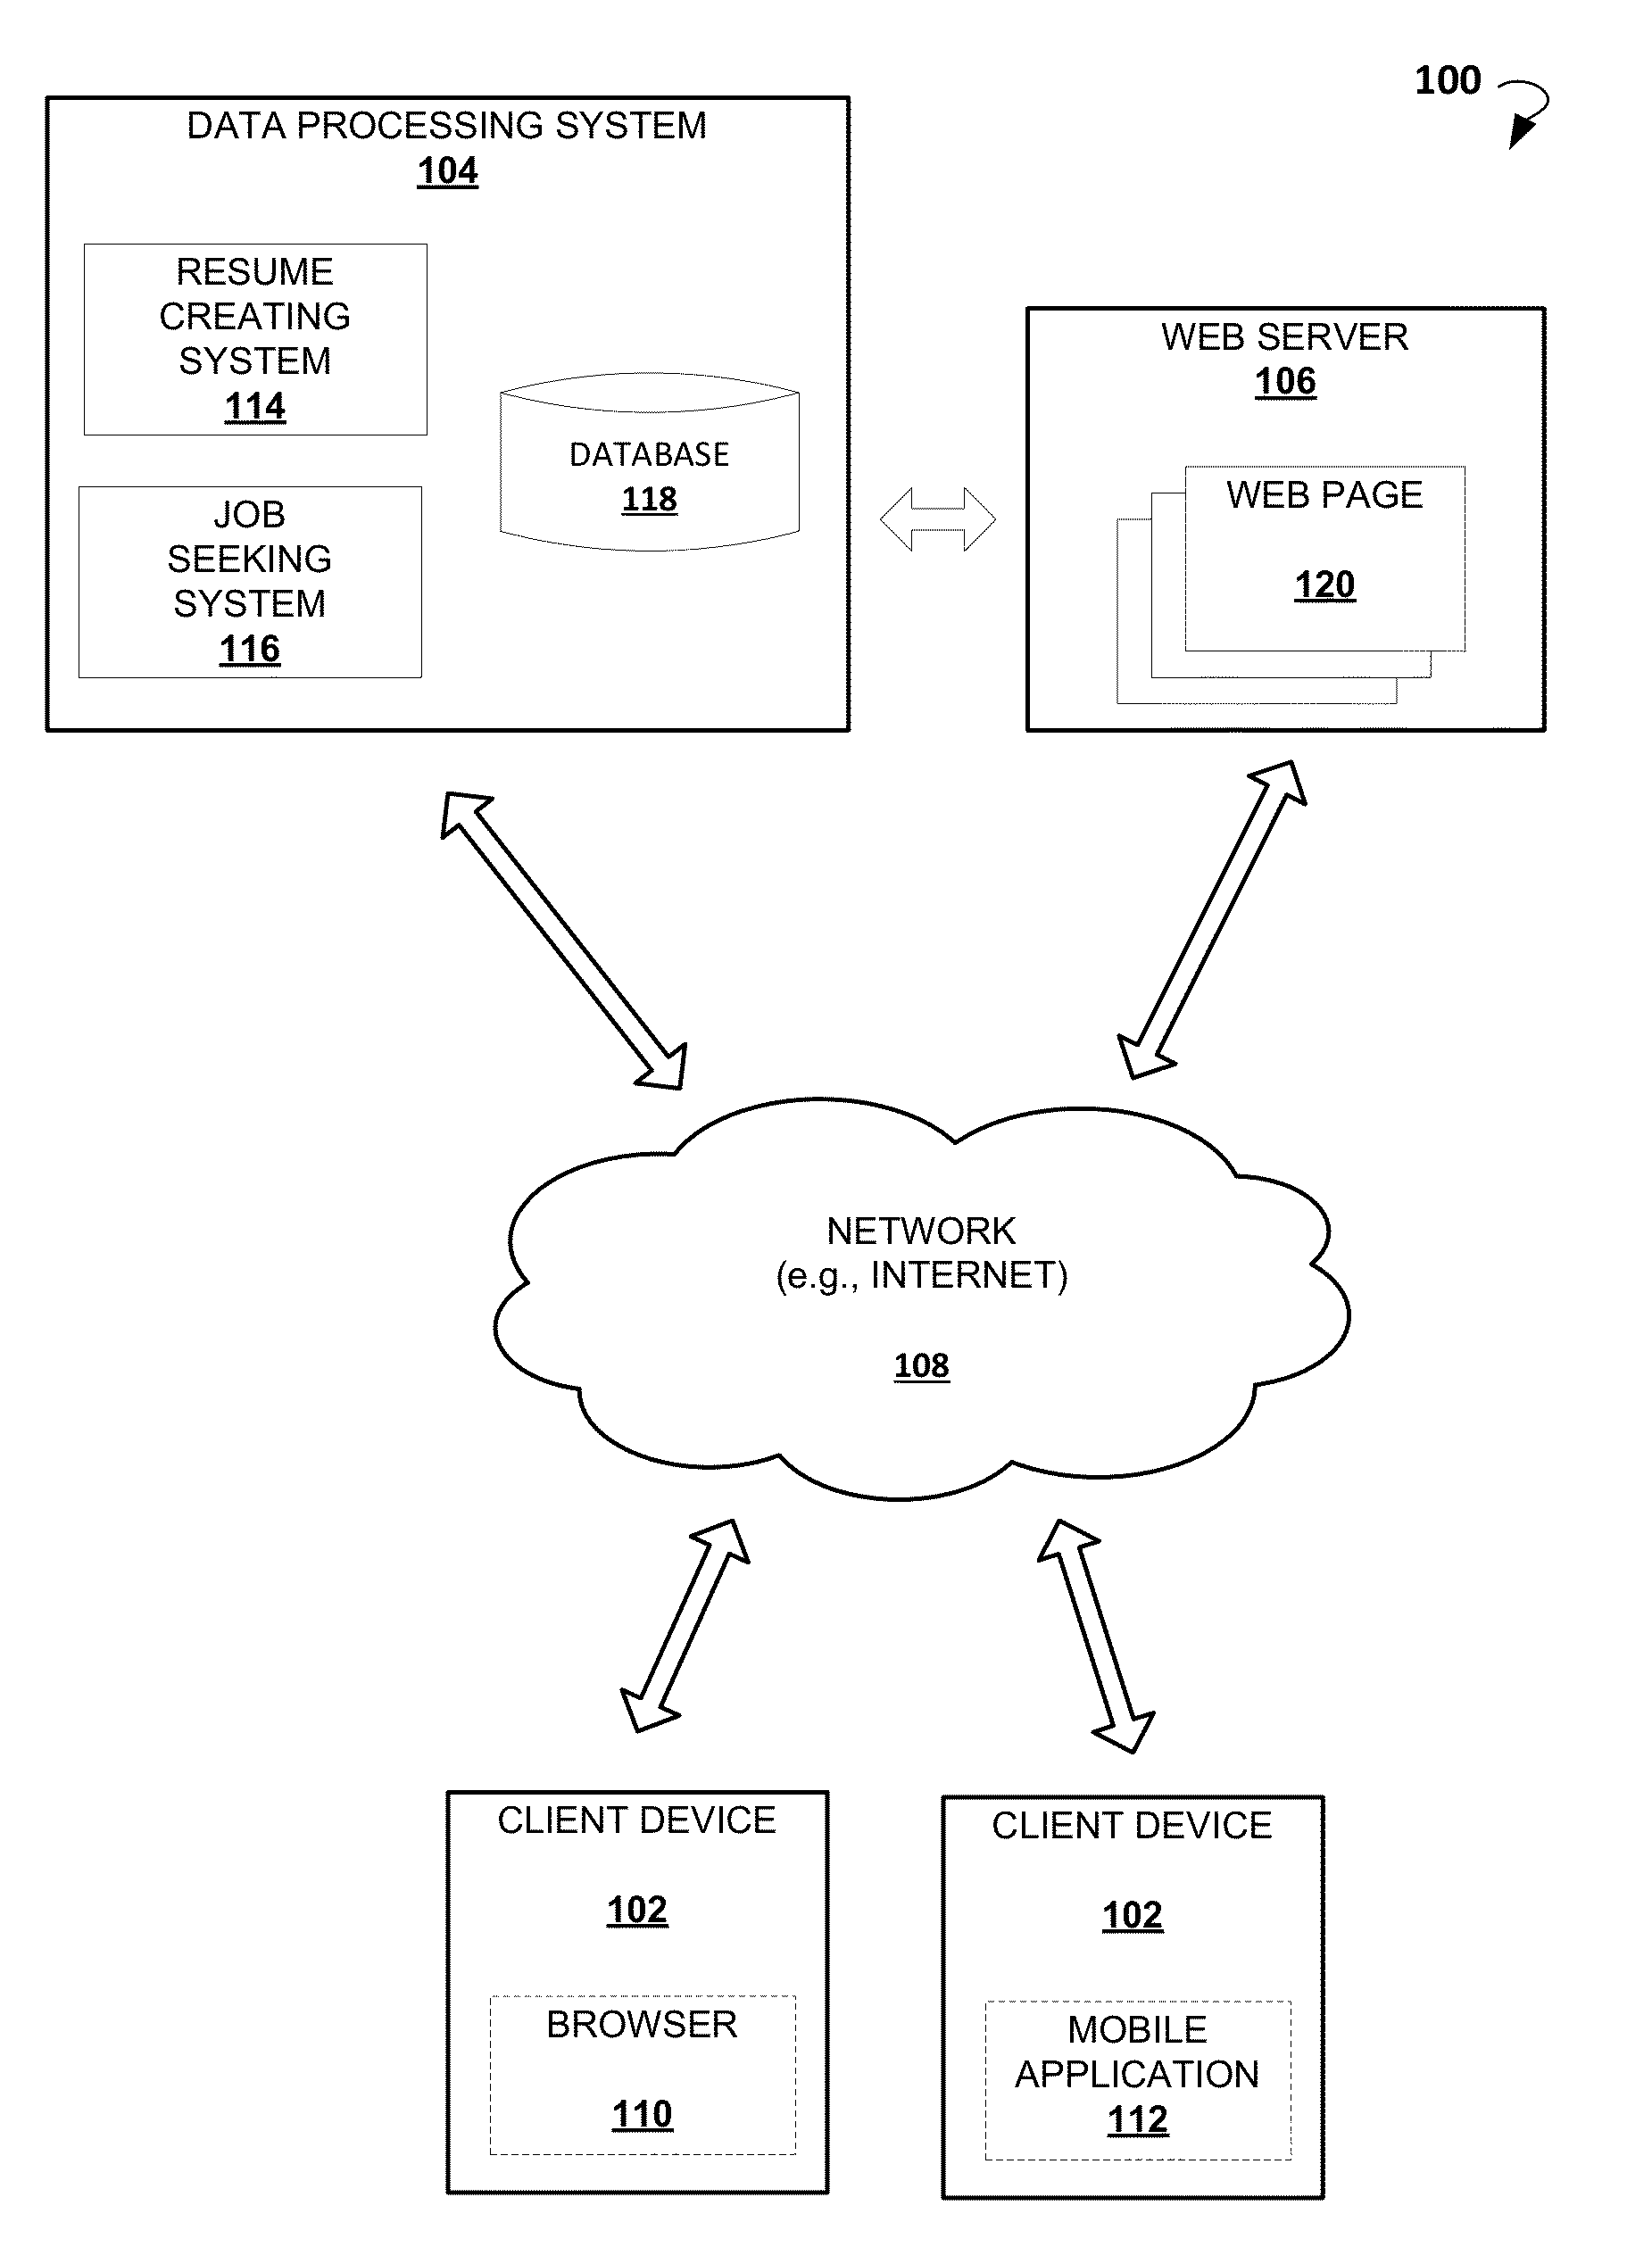 Psychographic based methods and systems for job seeking